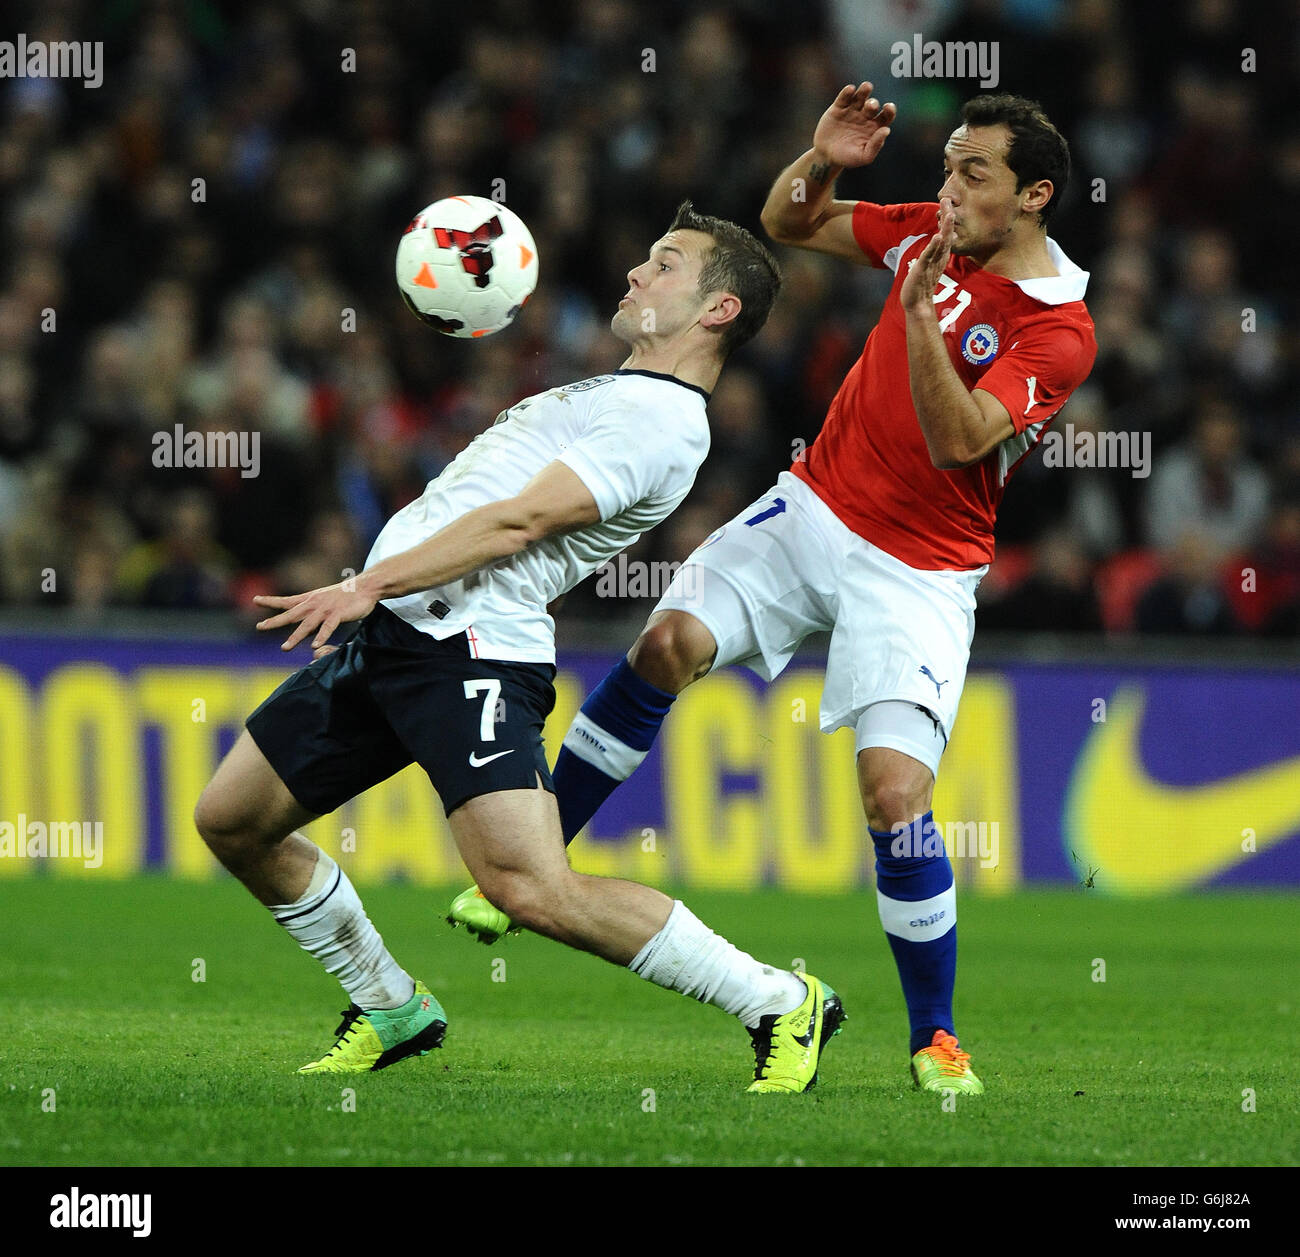 England's Jack Wilshere controls the ball as he is challenged by Chile's Marcelo Diaz Stock Photo